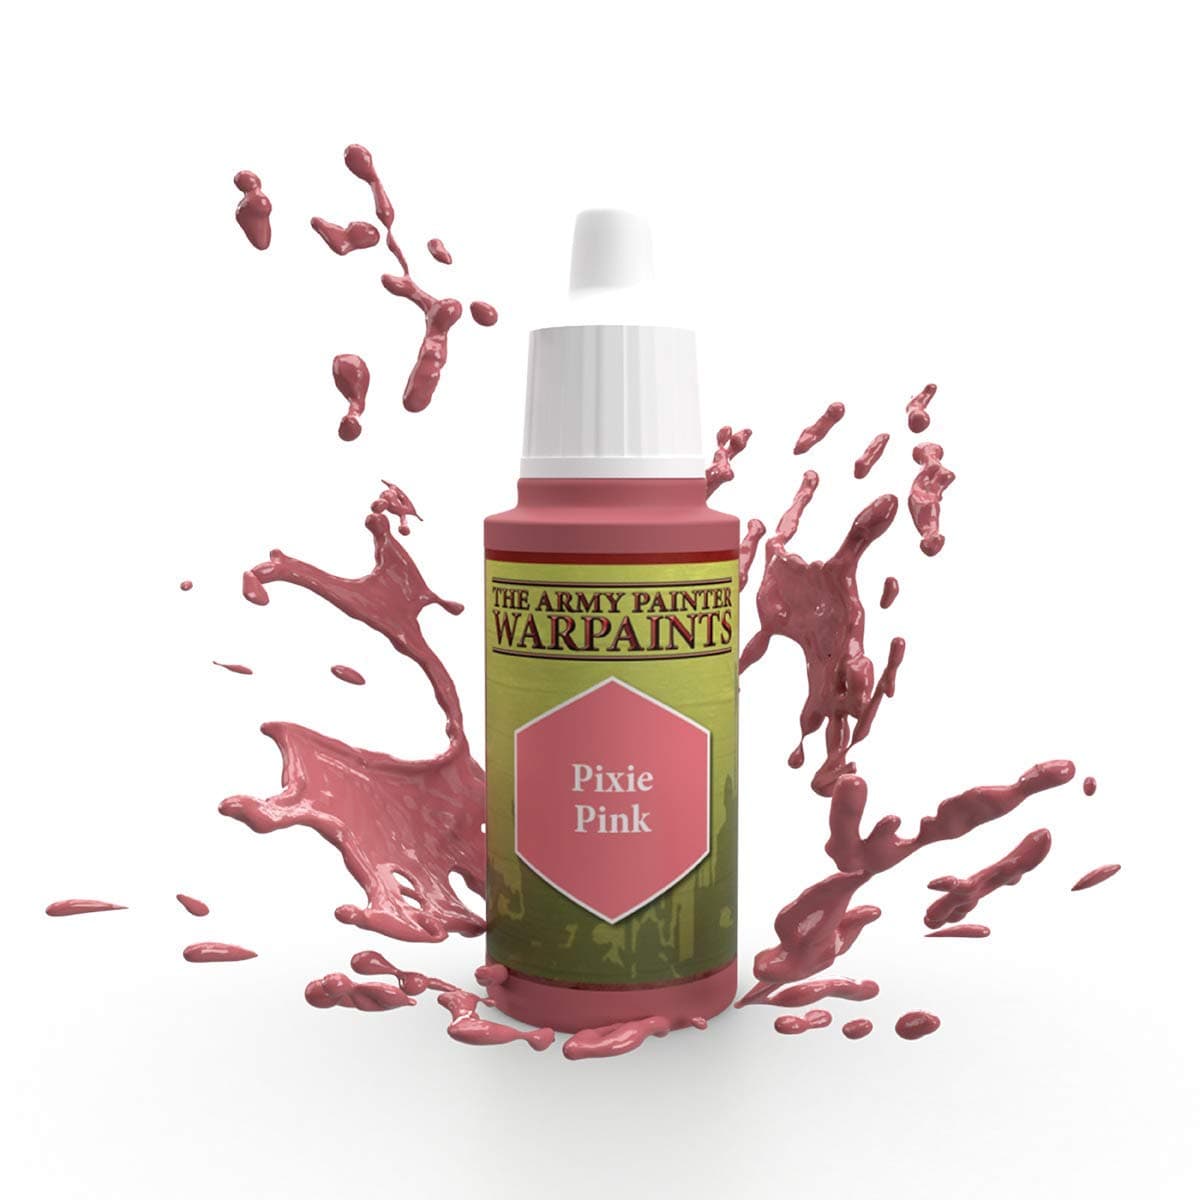 The Army Painter Accessories The Army Painter Warpaints: Pixie Pink 18ml